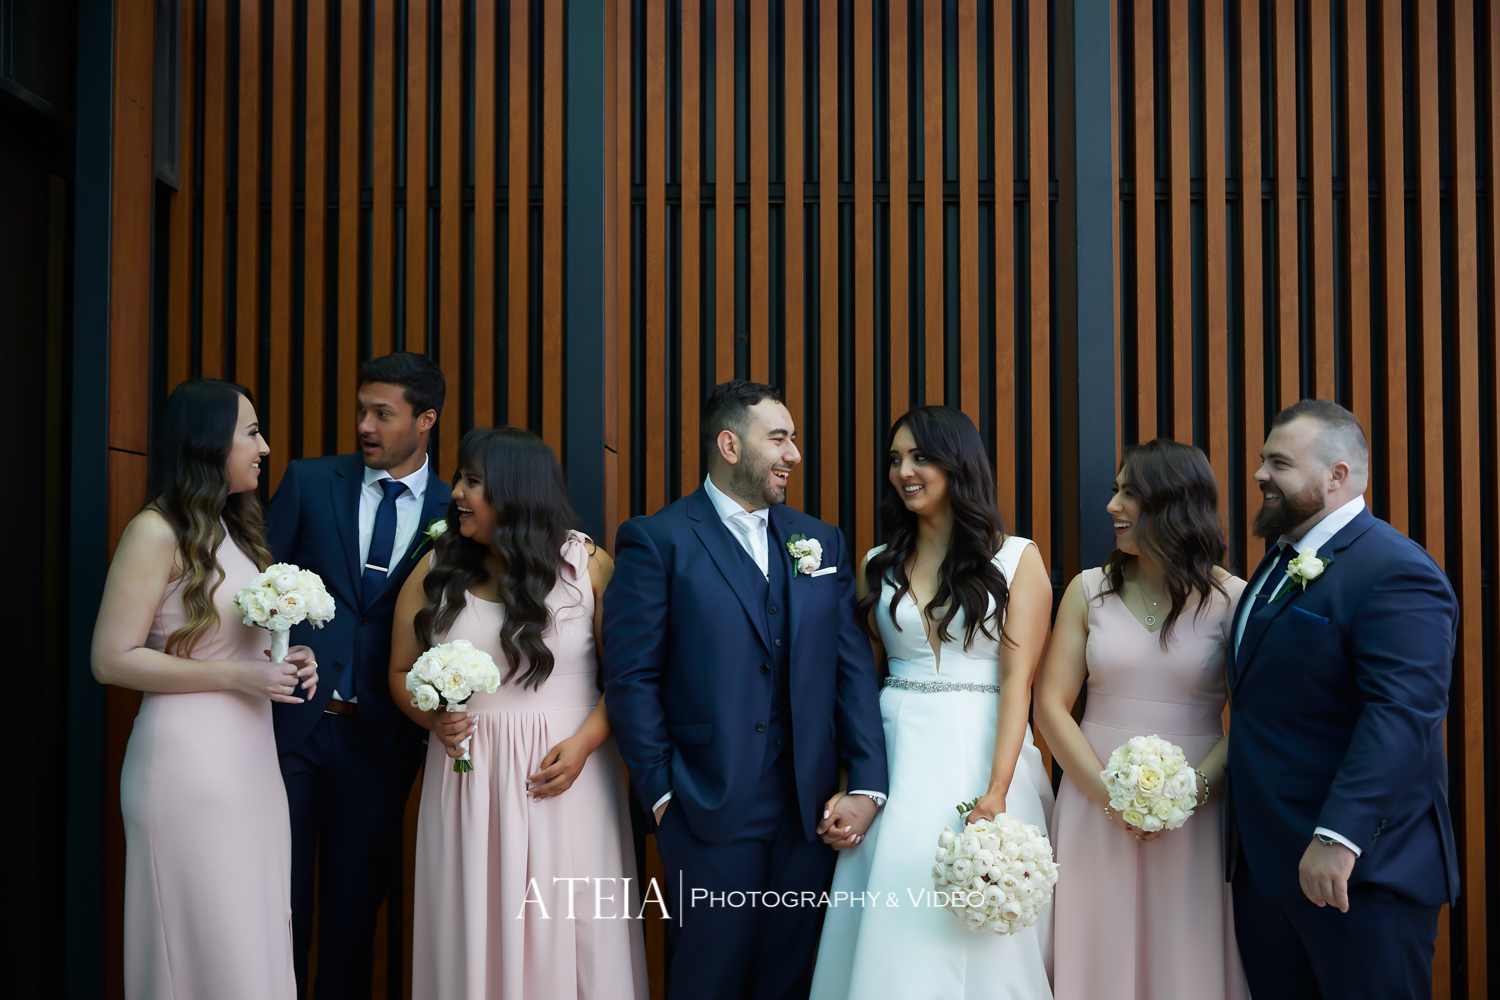 , Marnong Estate Wedding Photography Mickleham by ATEIA Photography &#038; Video